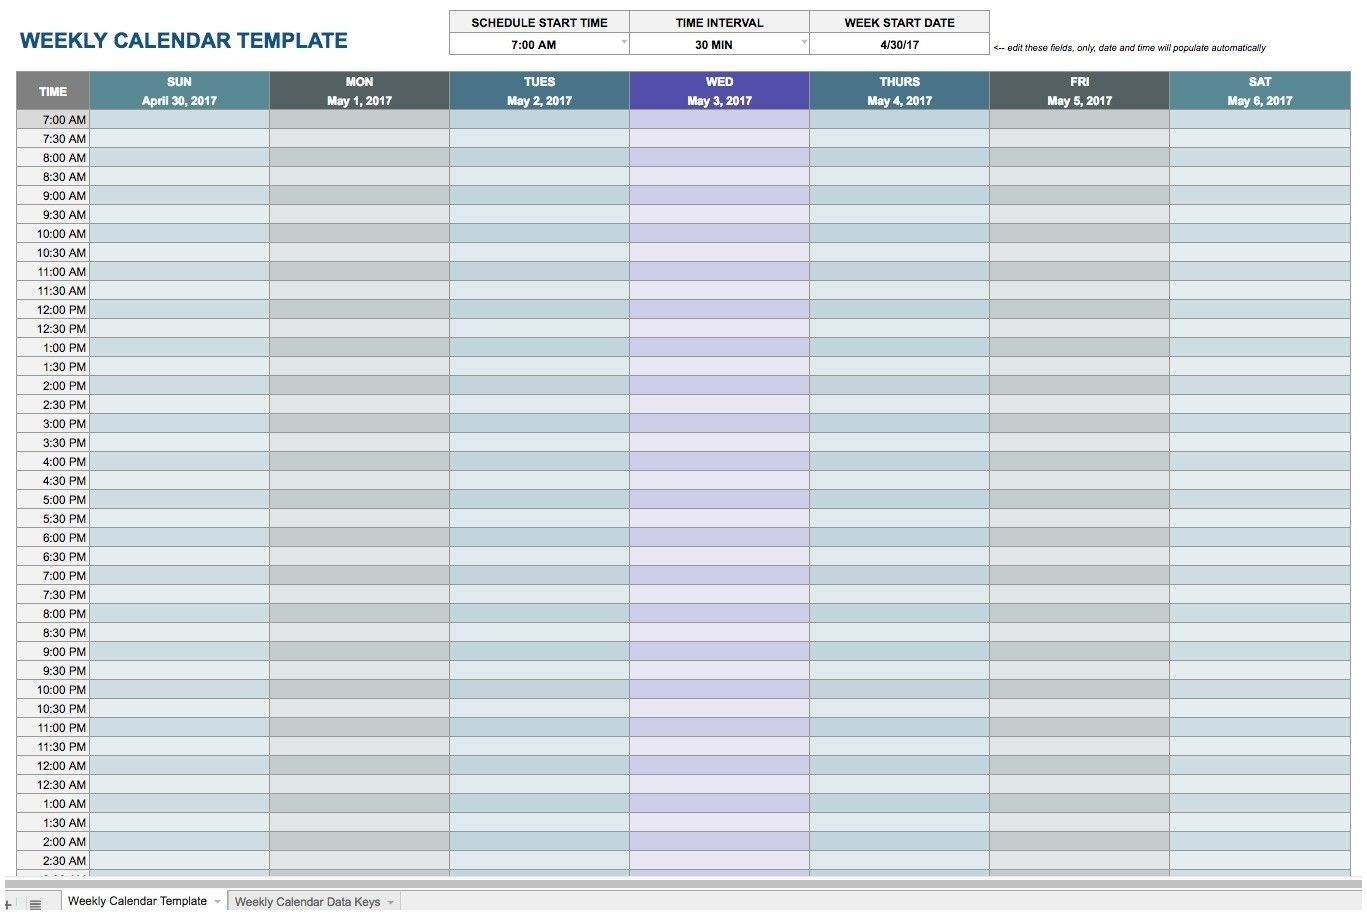 Daily Calendar Template Excel Appointment Schedule Template  15 Minute Schedule Printable Template